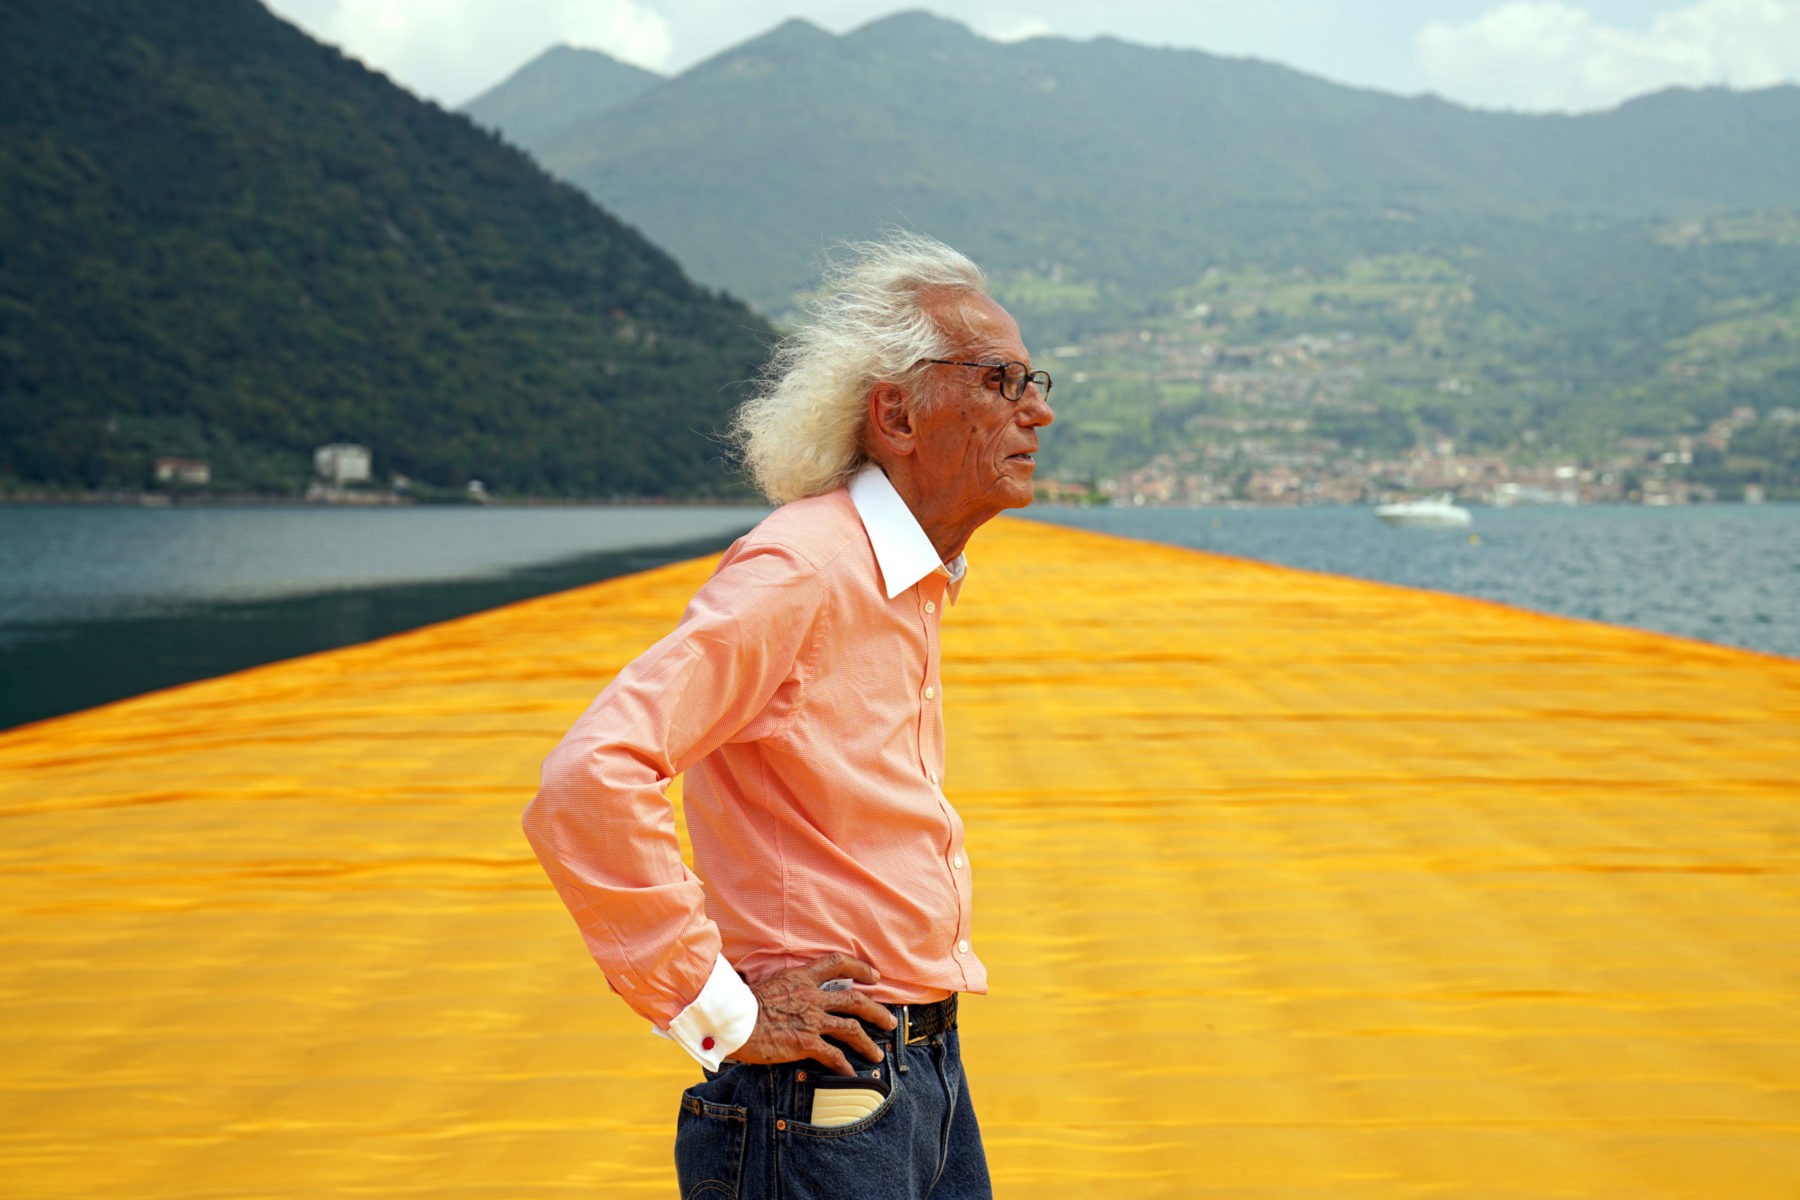 Christo,floating piers. Christo, l'artista delle Floating Piers, - 01/06/2020